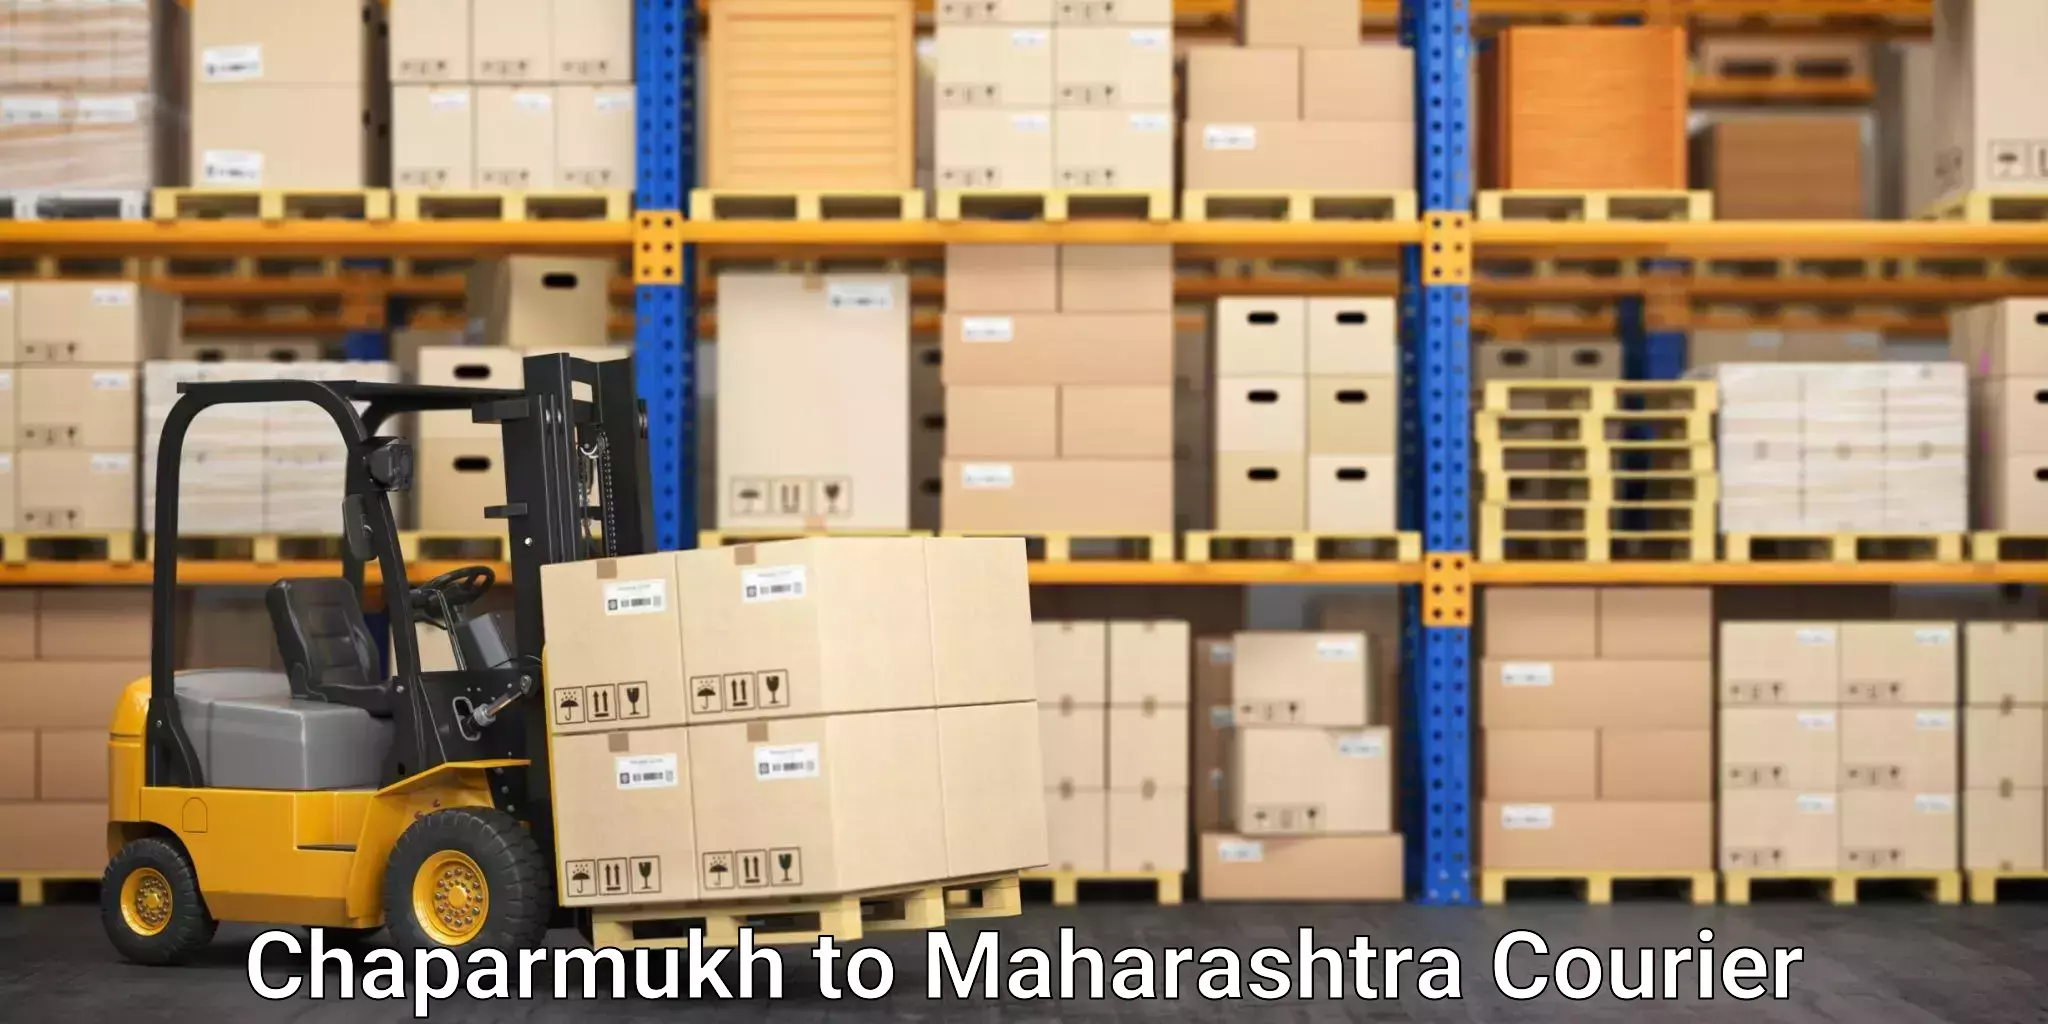 Reliable courier services in Chaparmukh to Nandurbar